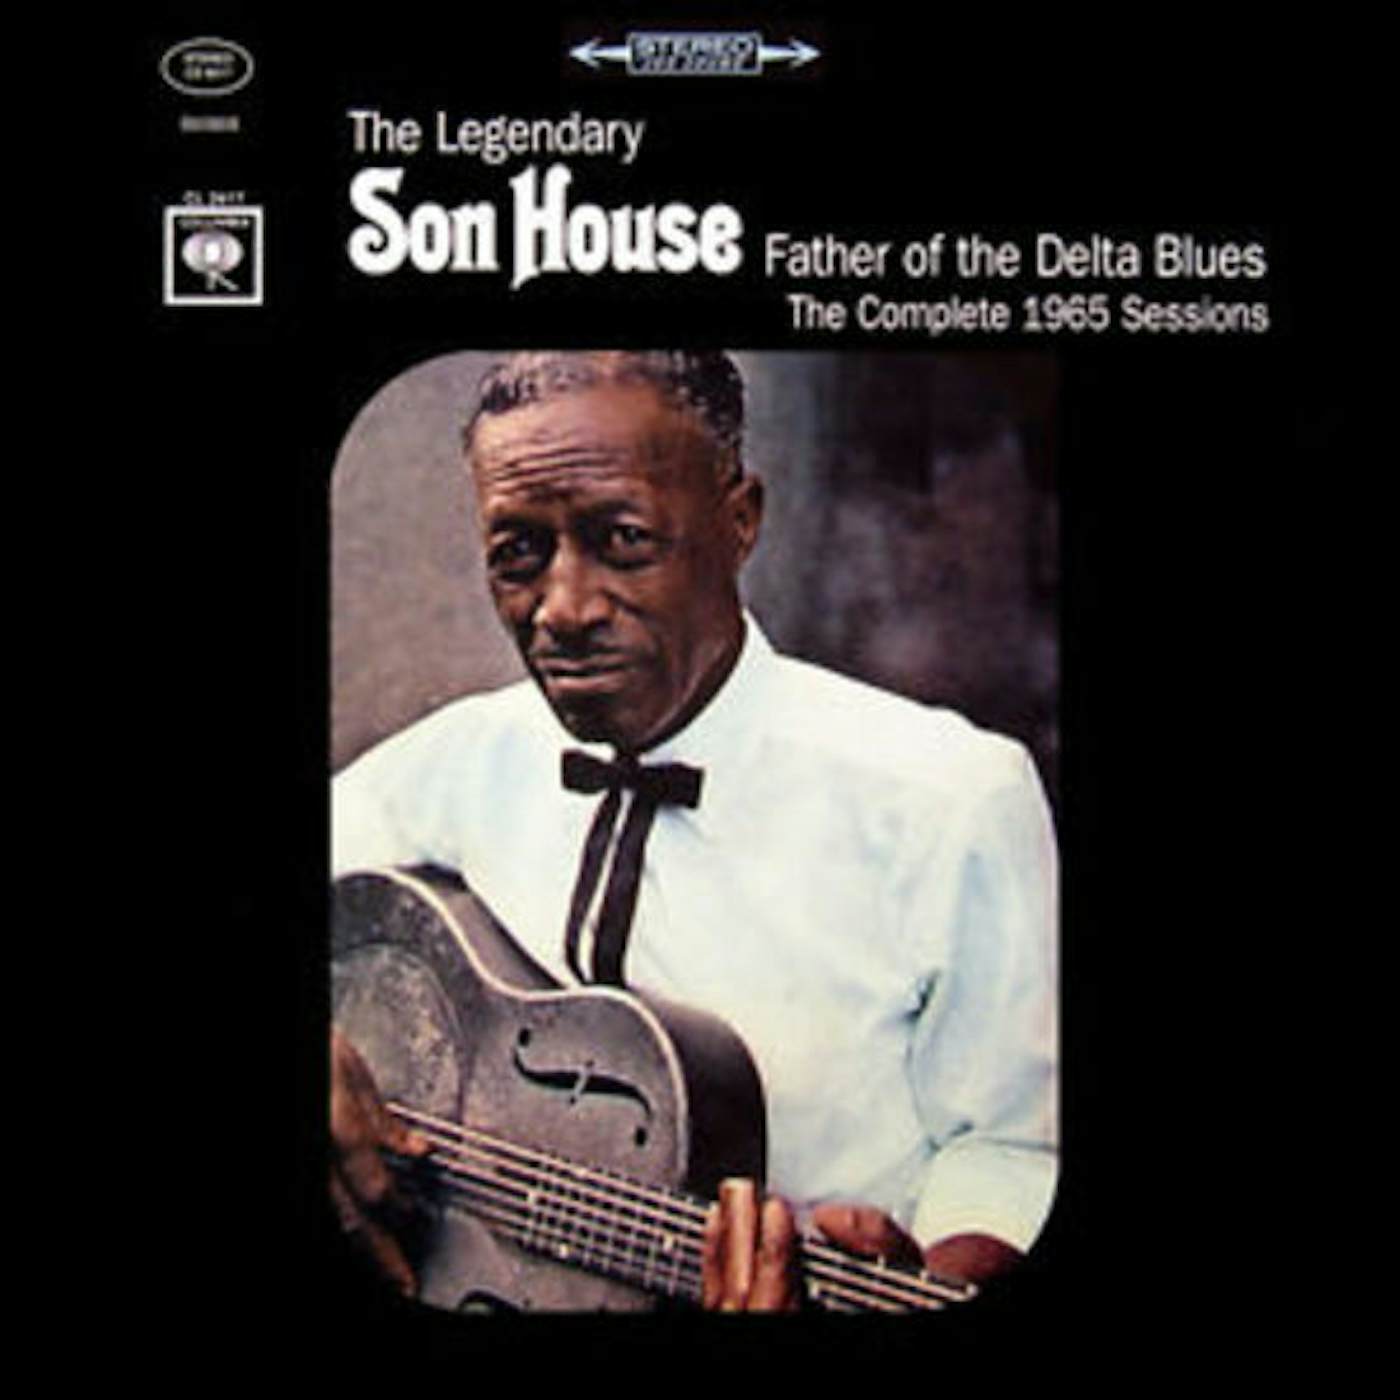 Son House FATHER OF THE DELTA BLUES: COMPLETE 1965 SESSION Vinyl Record